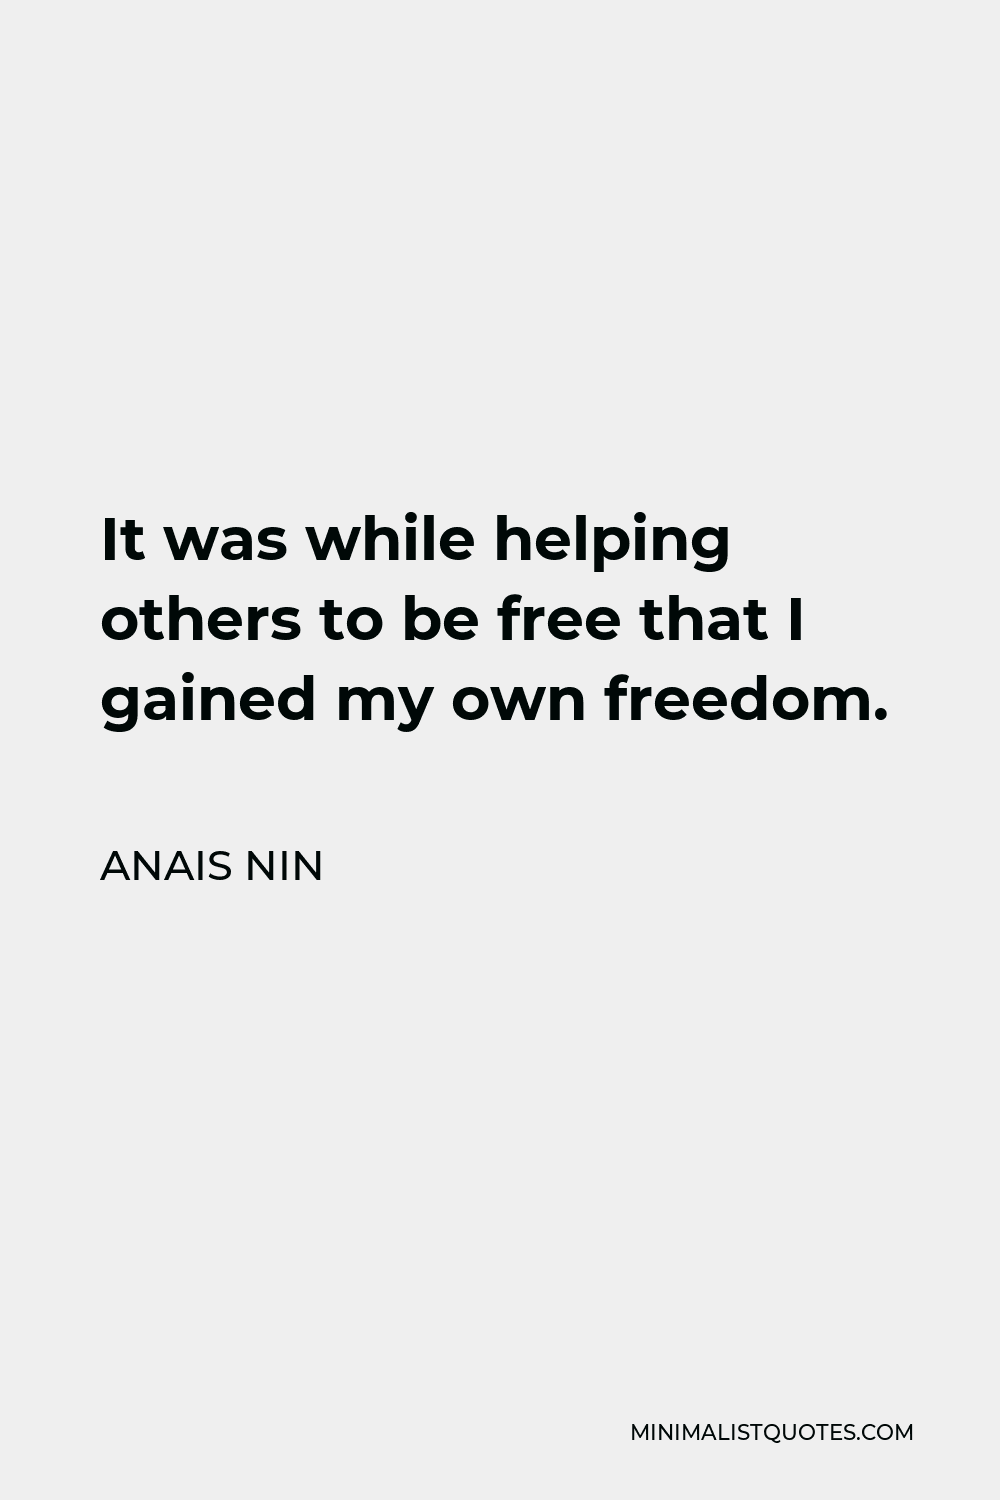 Anais Nin Quote - It was while helping others to be free that I gained my own freedom.